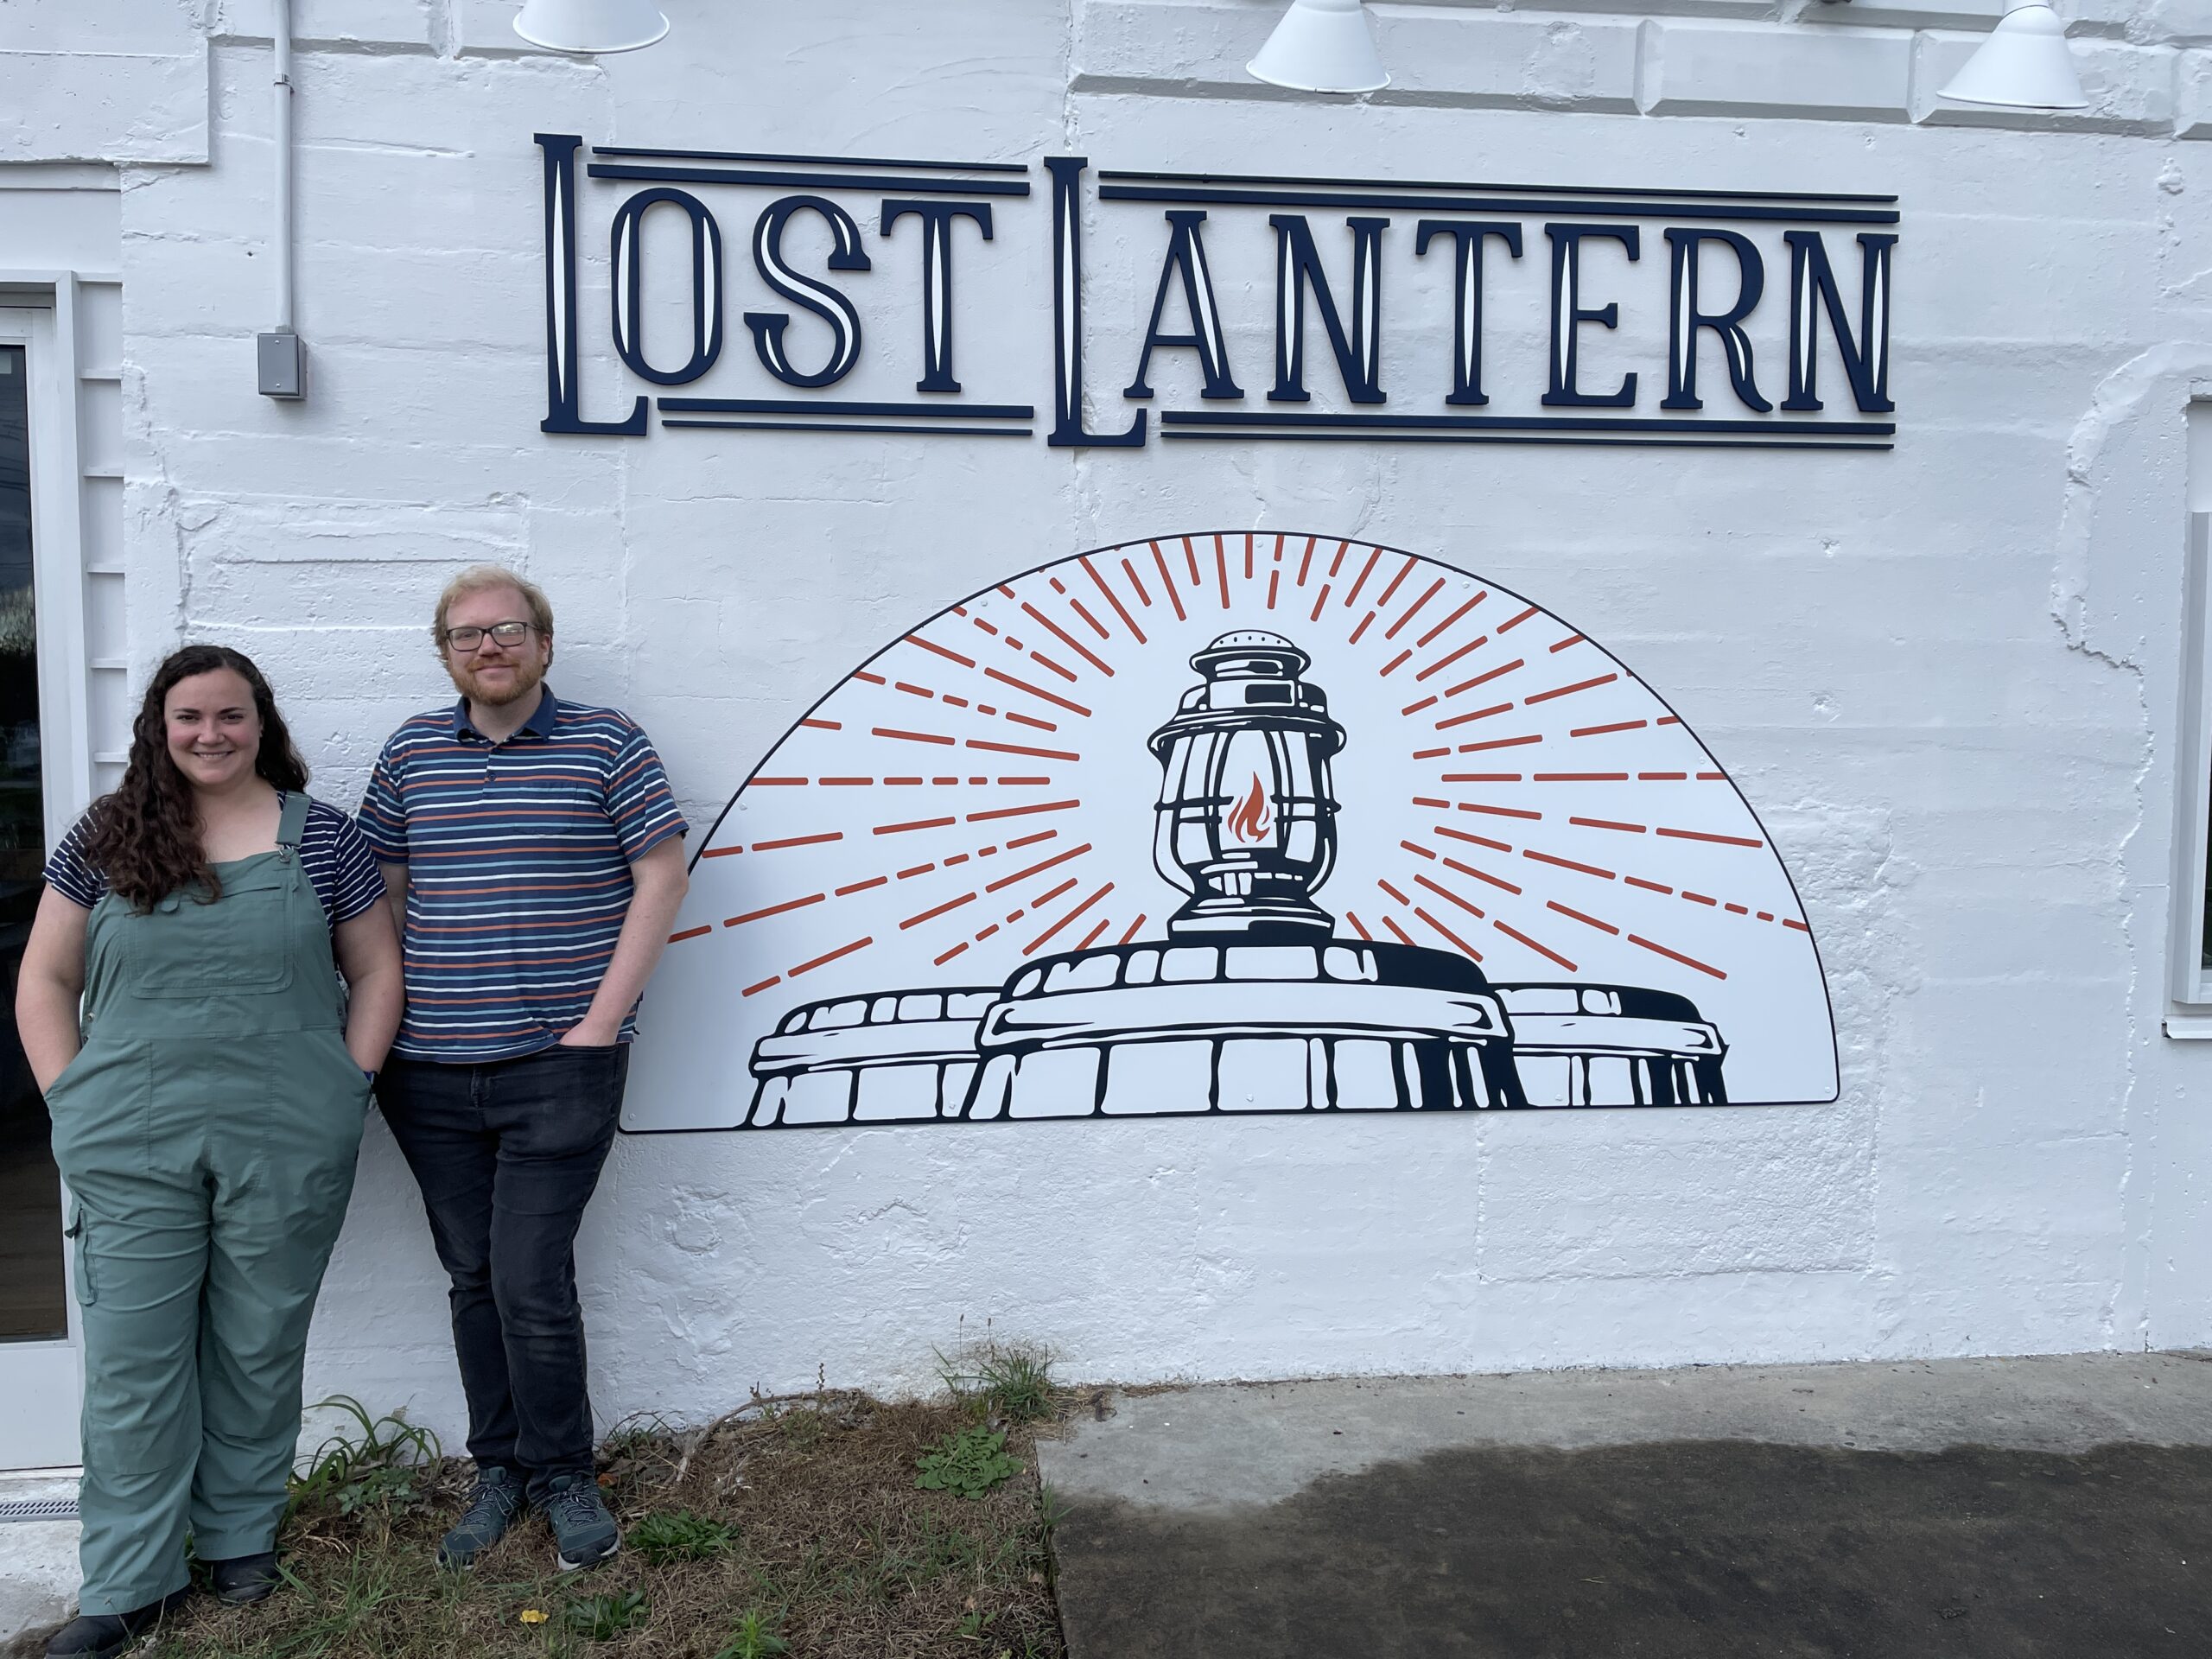 Lost Lantern Opens New Tasting Room in the Northeast